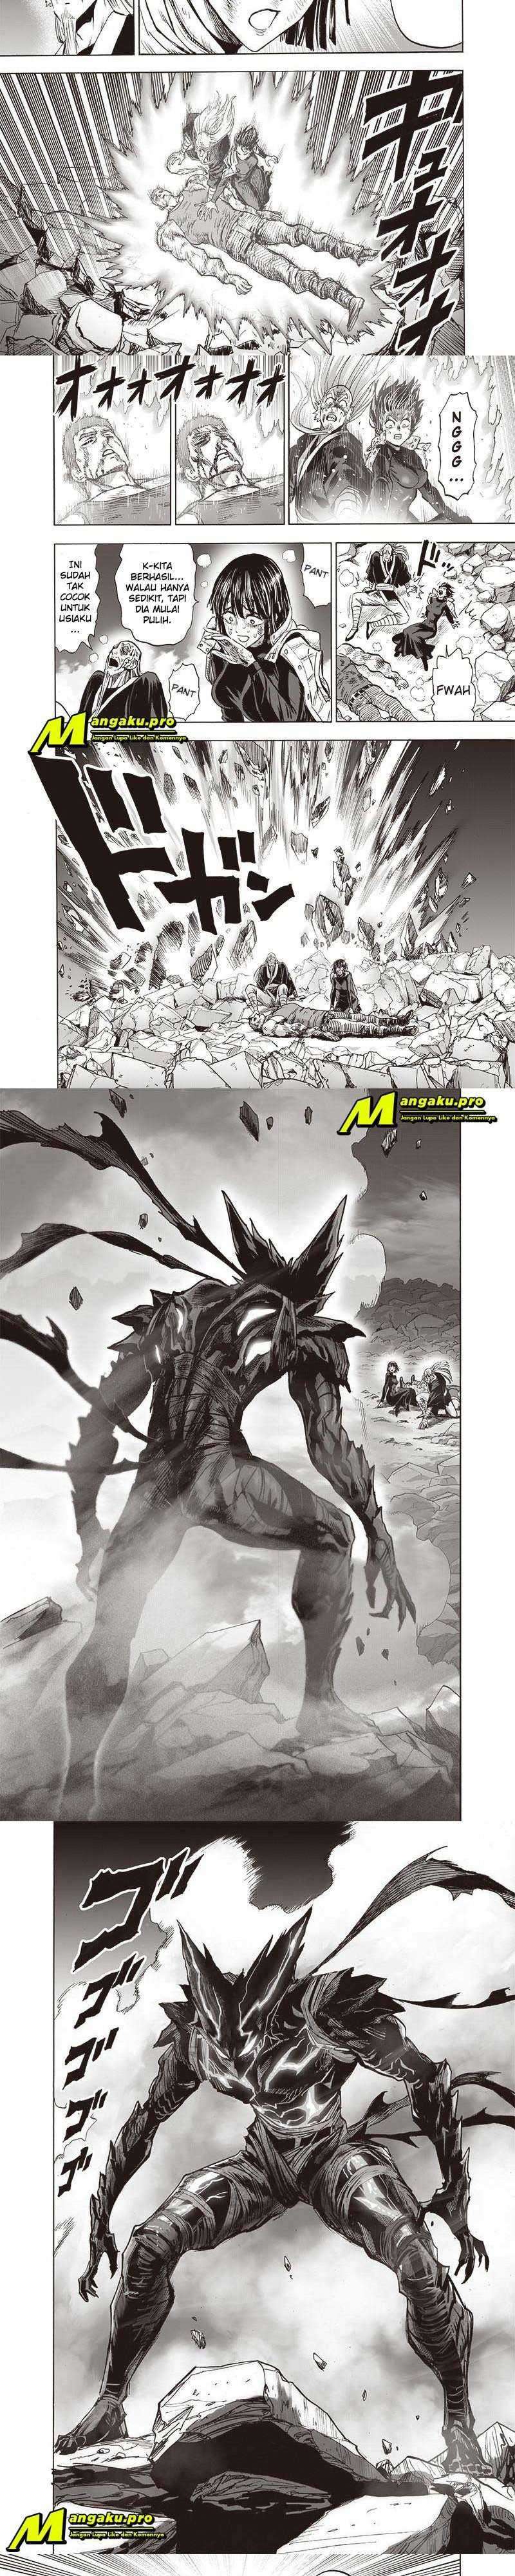 One Punch Man Chapter 196